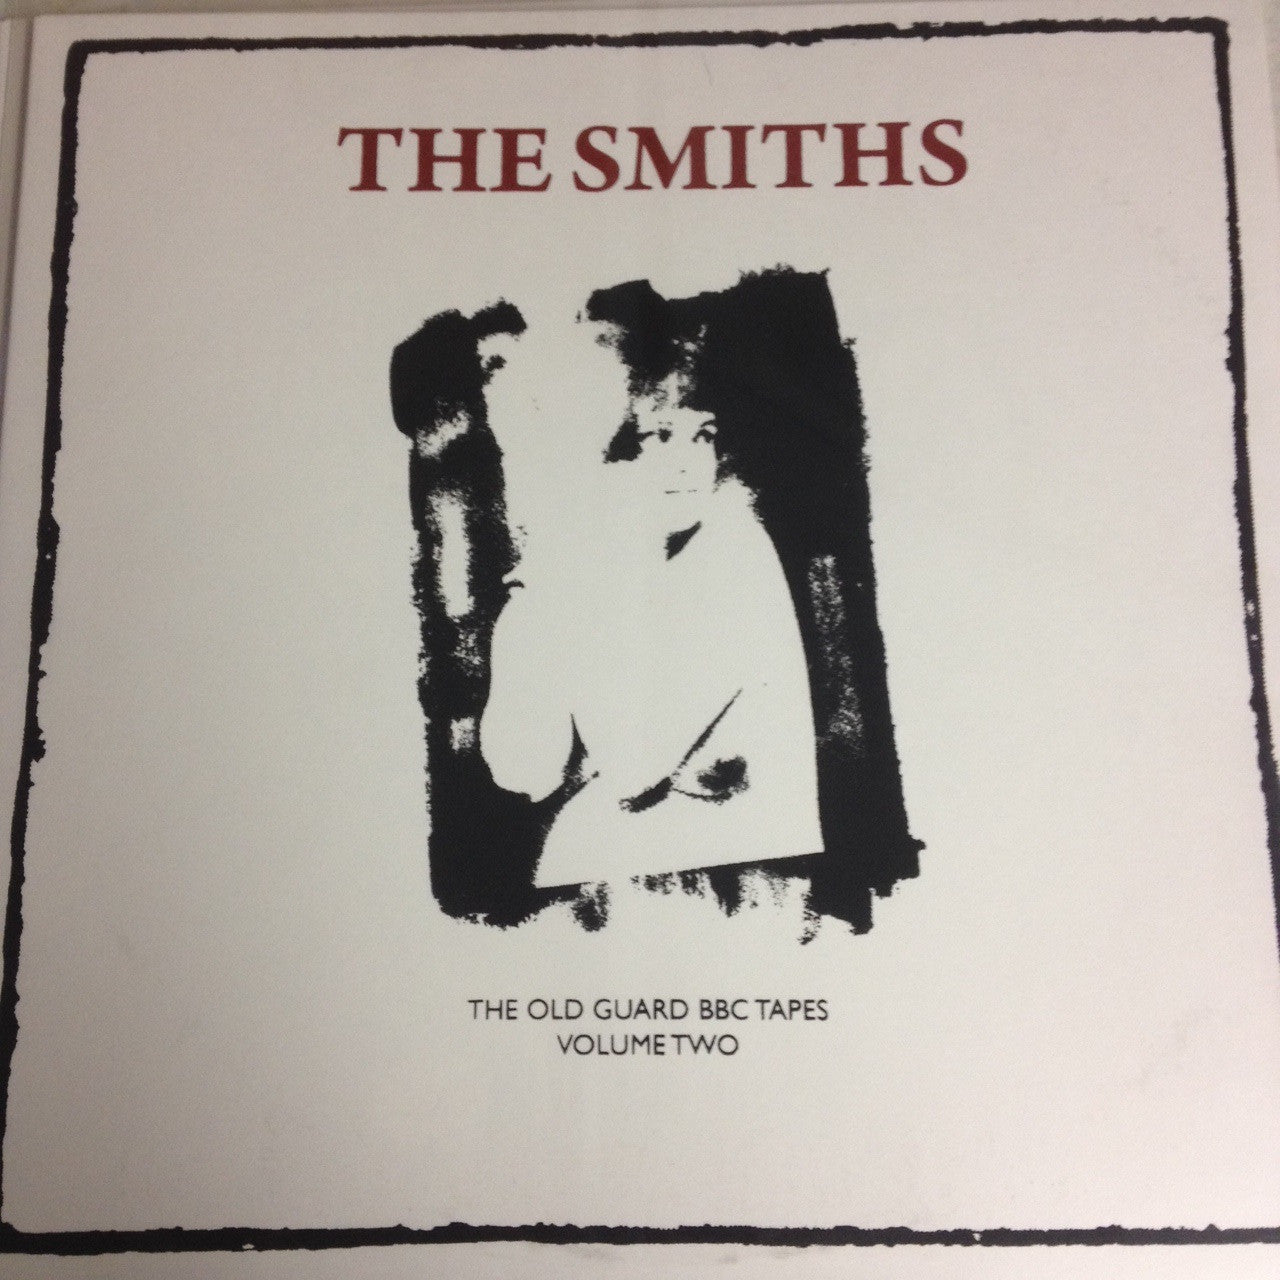 Smiths, The "The Old Guard. BBC Tapes Vol Two" LP - Dead Tank Records - 1